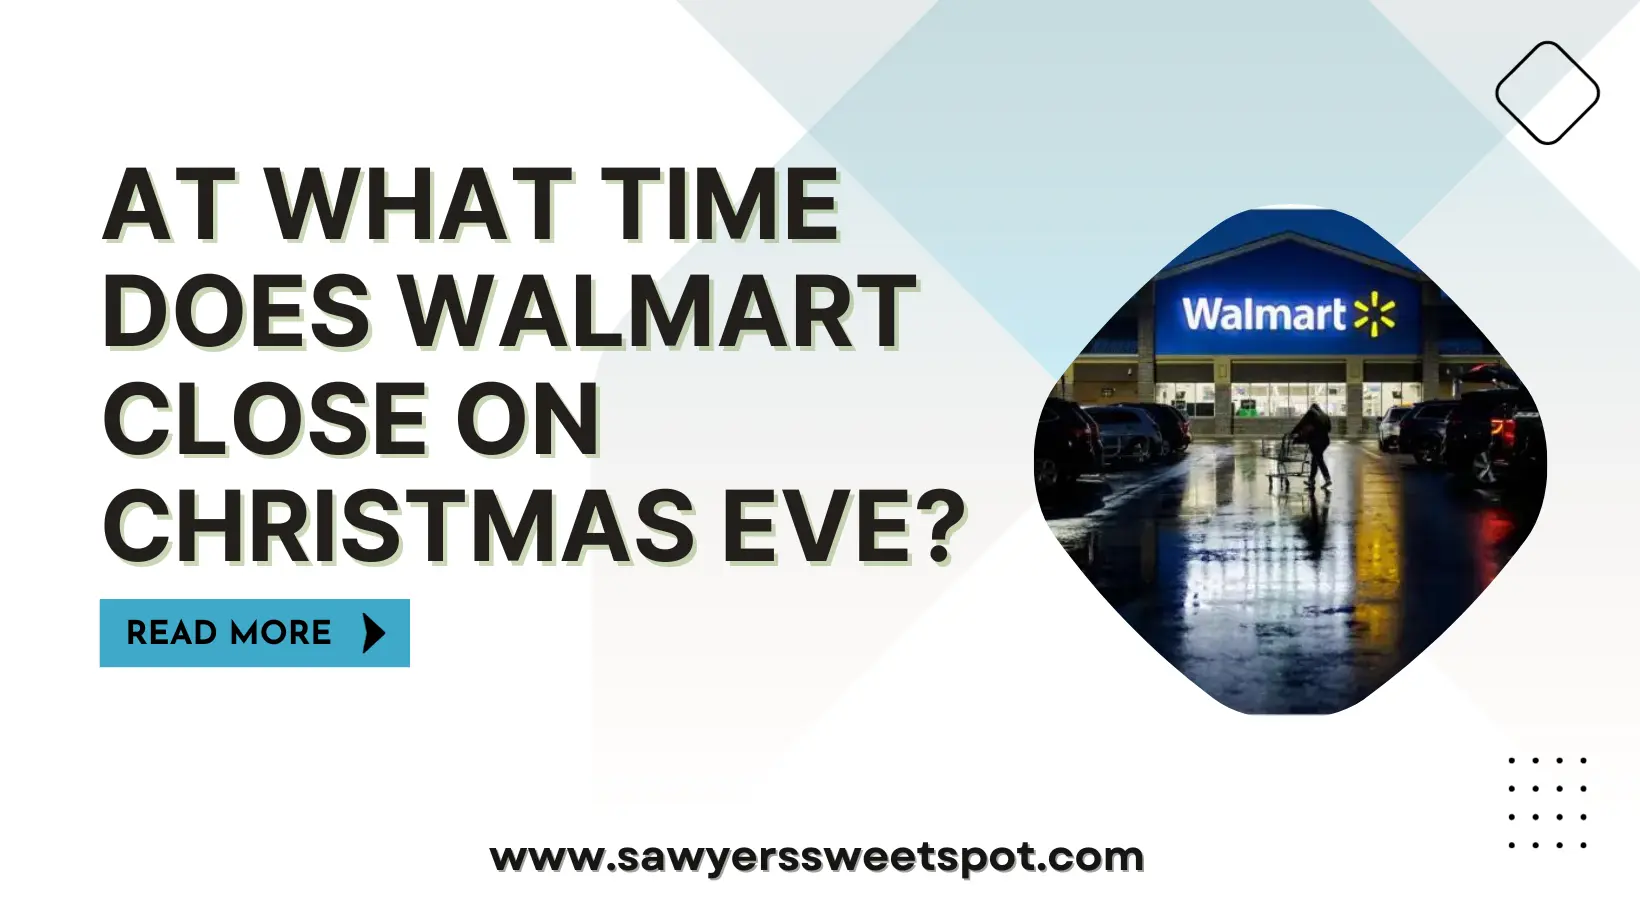 At What Time Does Walmart Close On Christmas Eve?